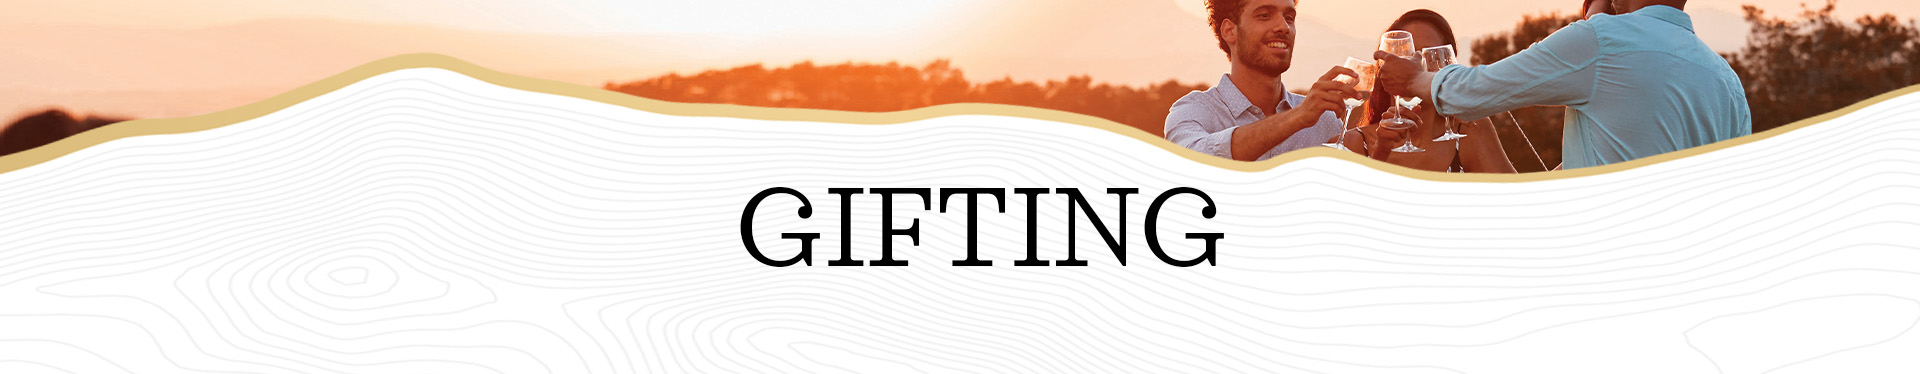 "Gifting" written over individuals drinking various glasses of Nepenthe wine